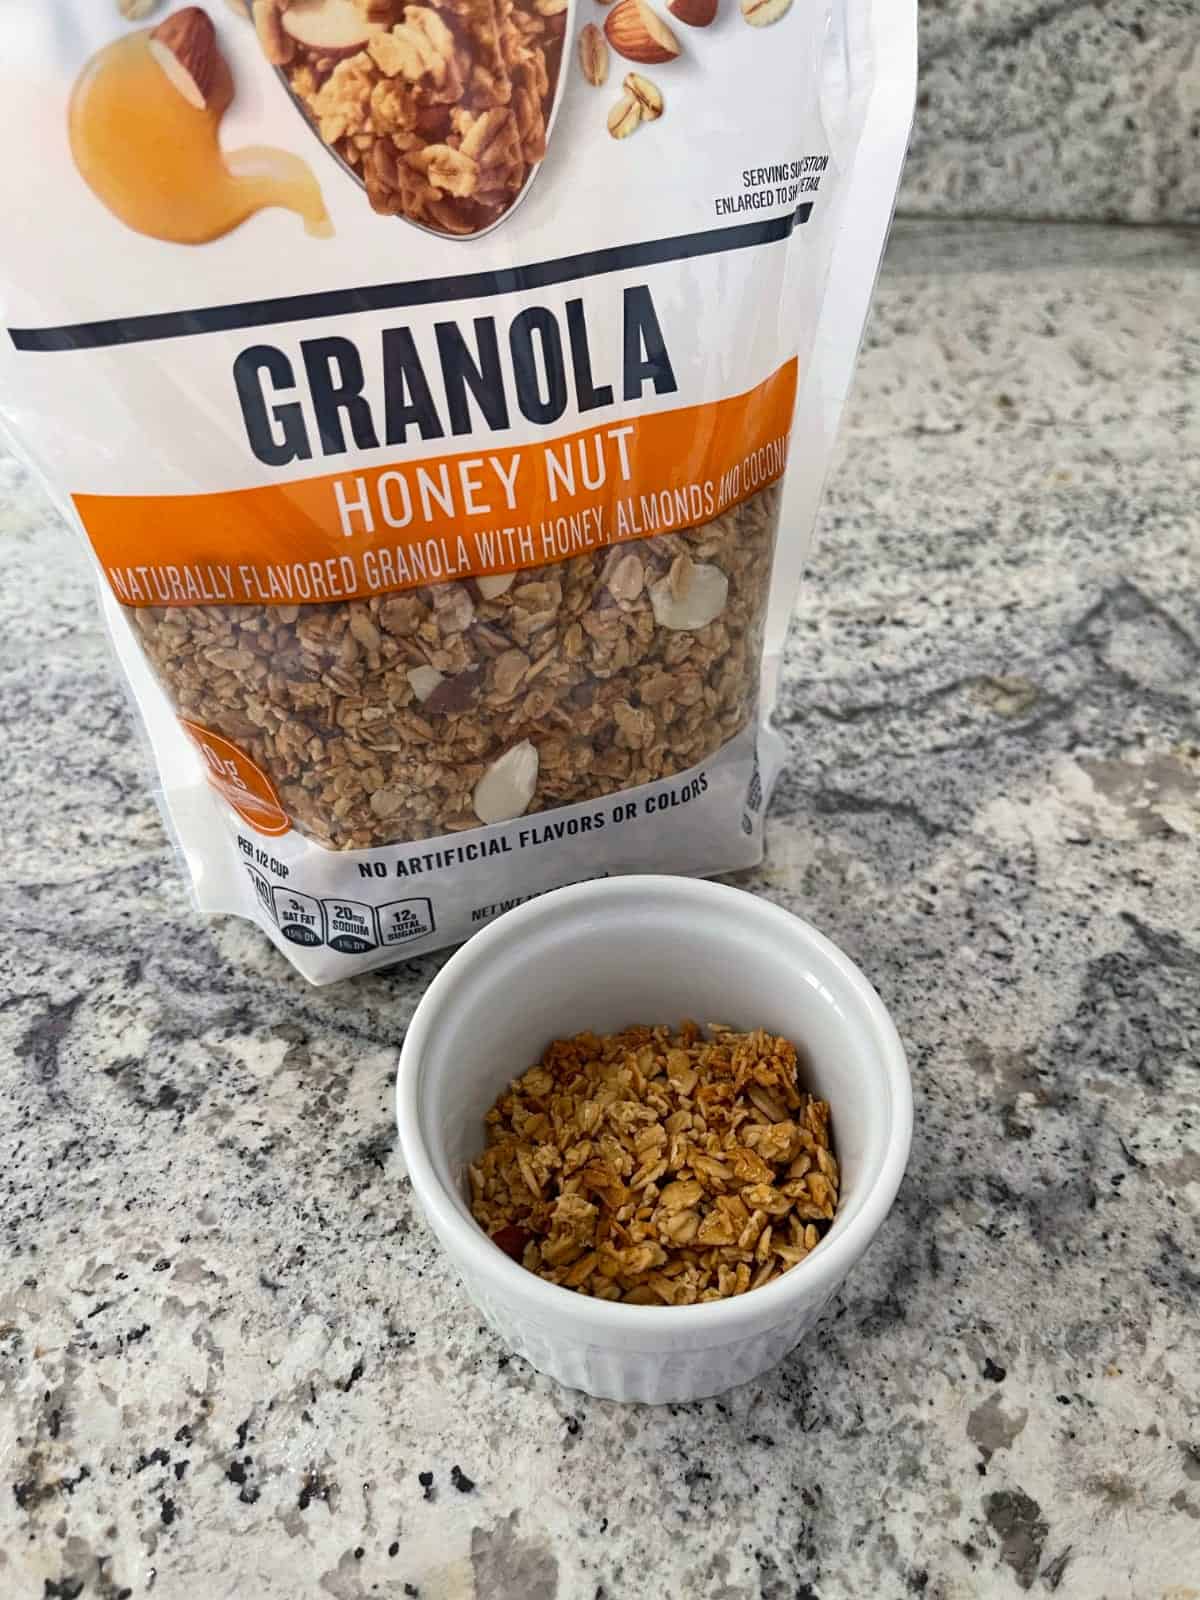 Package of honey nut granola with some in small white bowl.